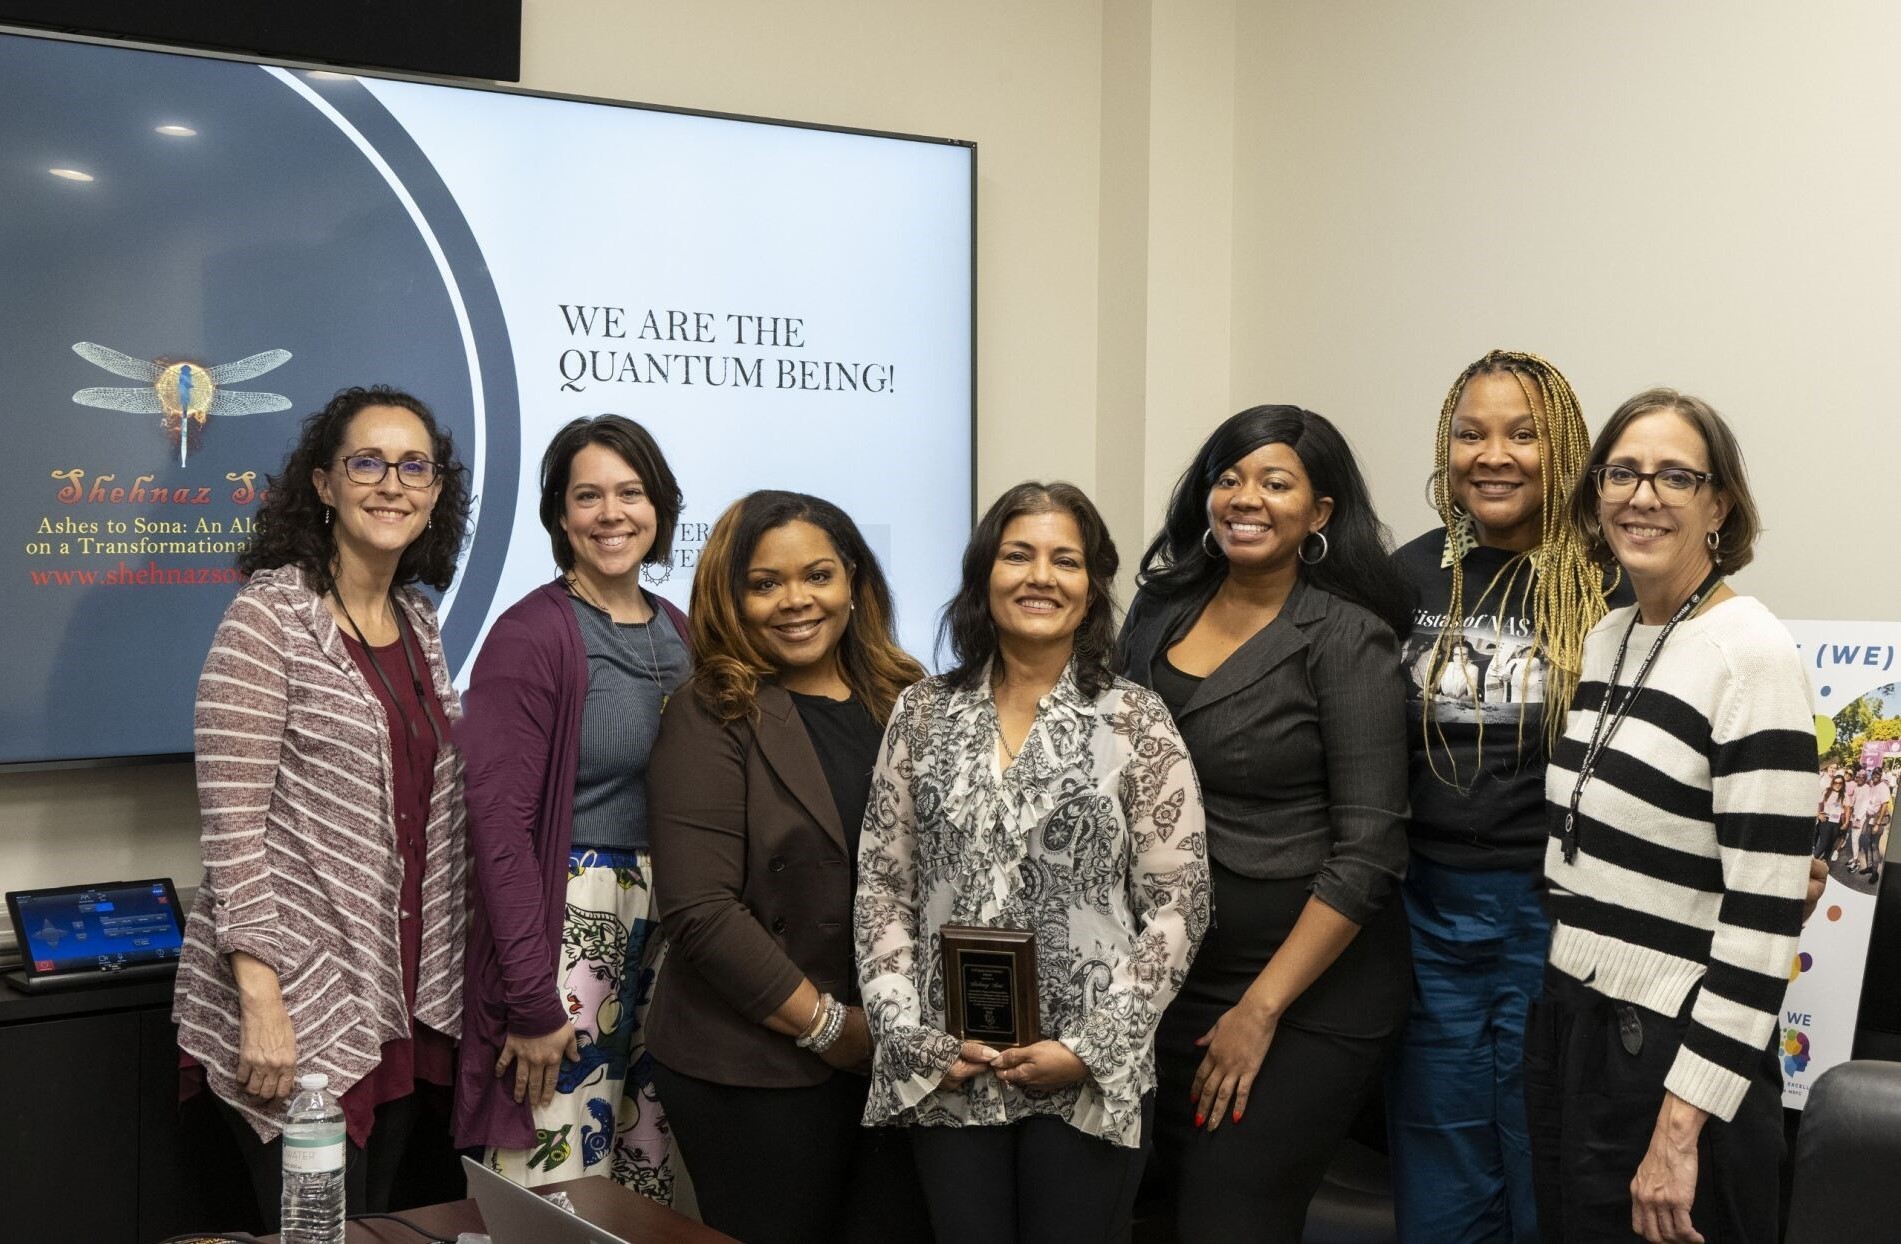 Shehnaz Soni, center, a NASA senior systems engineer, author, and speaker, smiles with Women of Excellence members following her March 18 presentation to the employee resource group at NASA's Marshall Space Flight Center. The event was a part of Women's History Month in March. From left are Kristina Honeycutt, Leah Varner, Denise Smithers, Soni, LaBreesha Batey, Aquita Wherry, and Anastasia Byler.